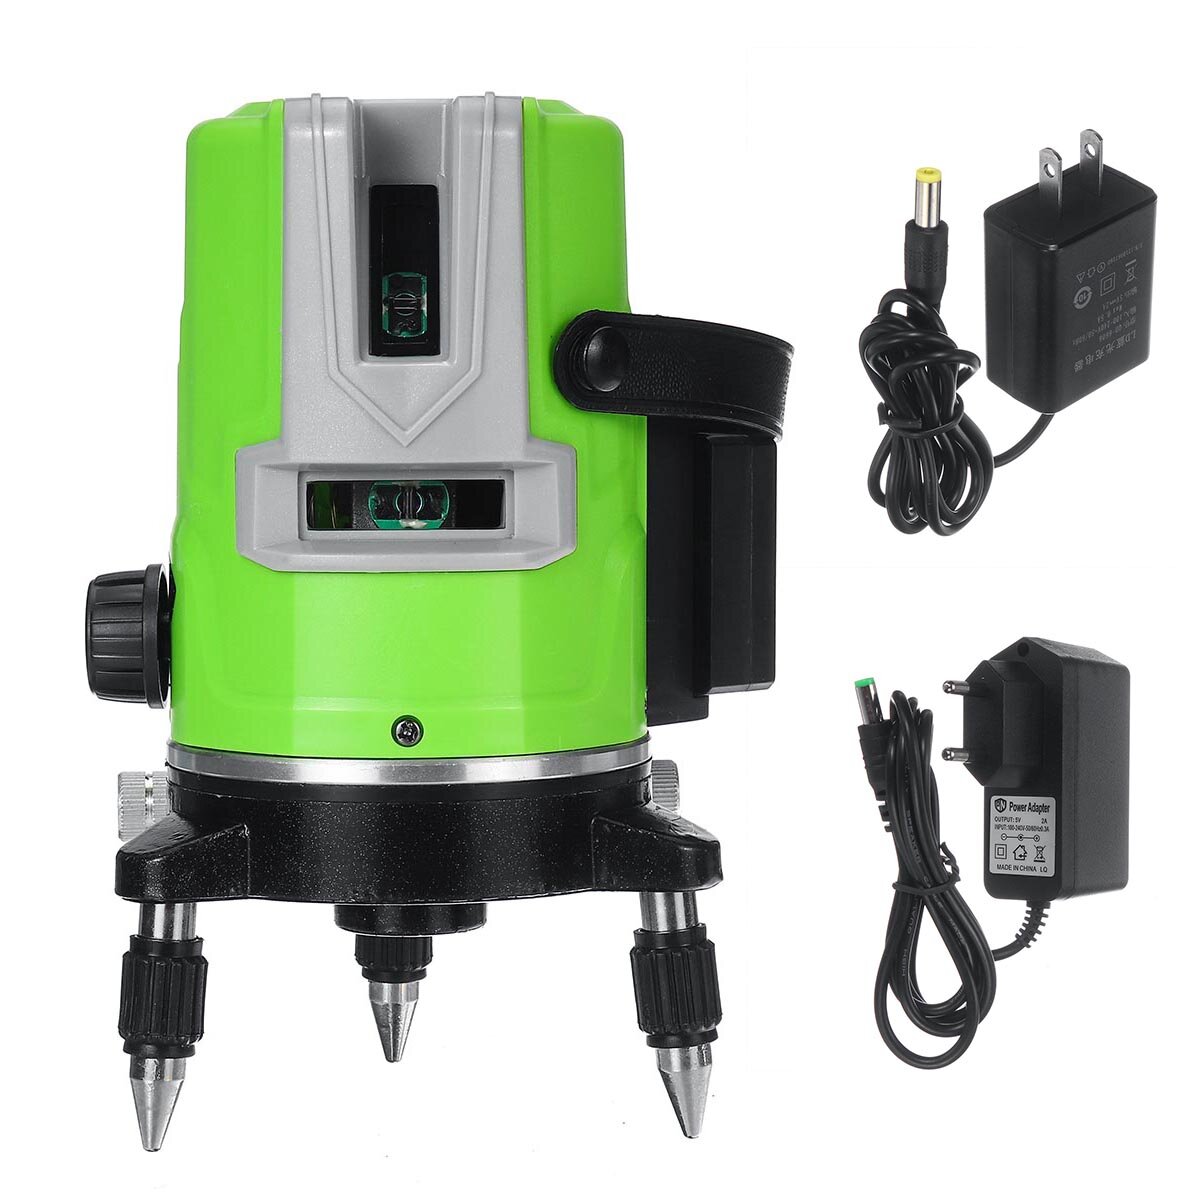 

3D 5 Lines Green Laser Level Self-Leveling 360° Rotary Cross Measuring Tool